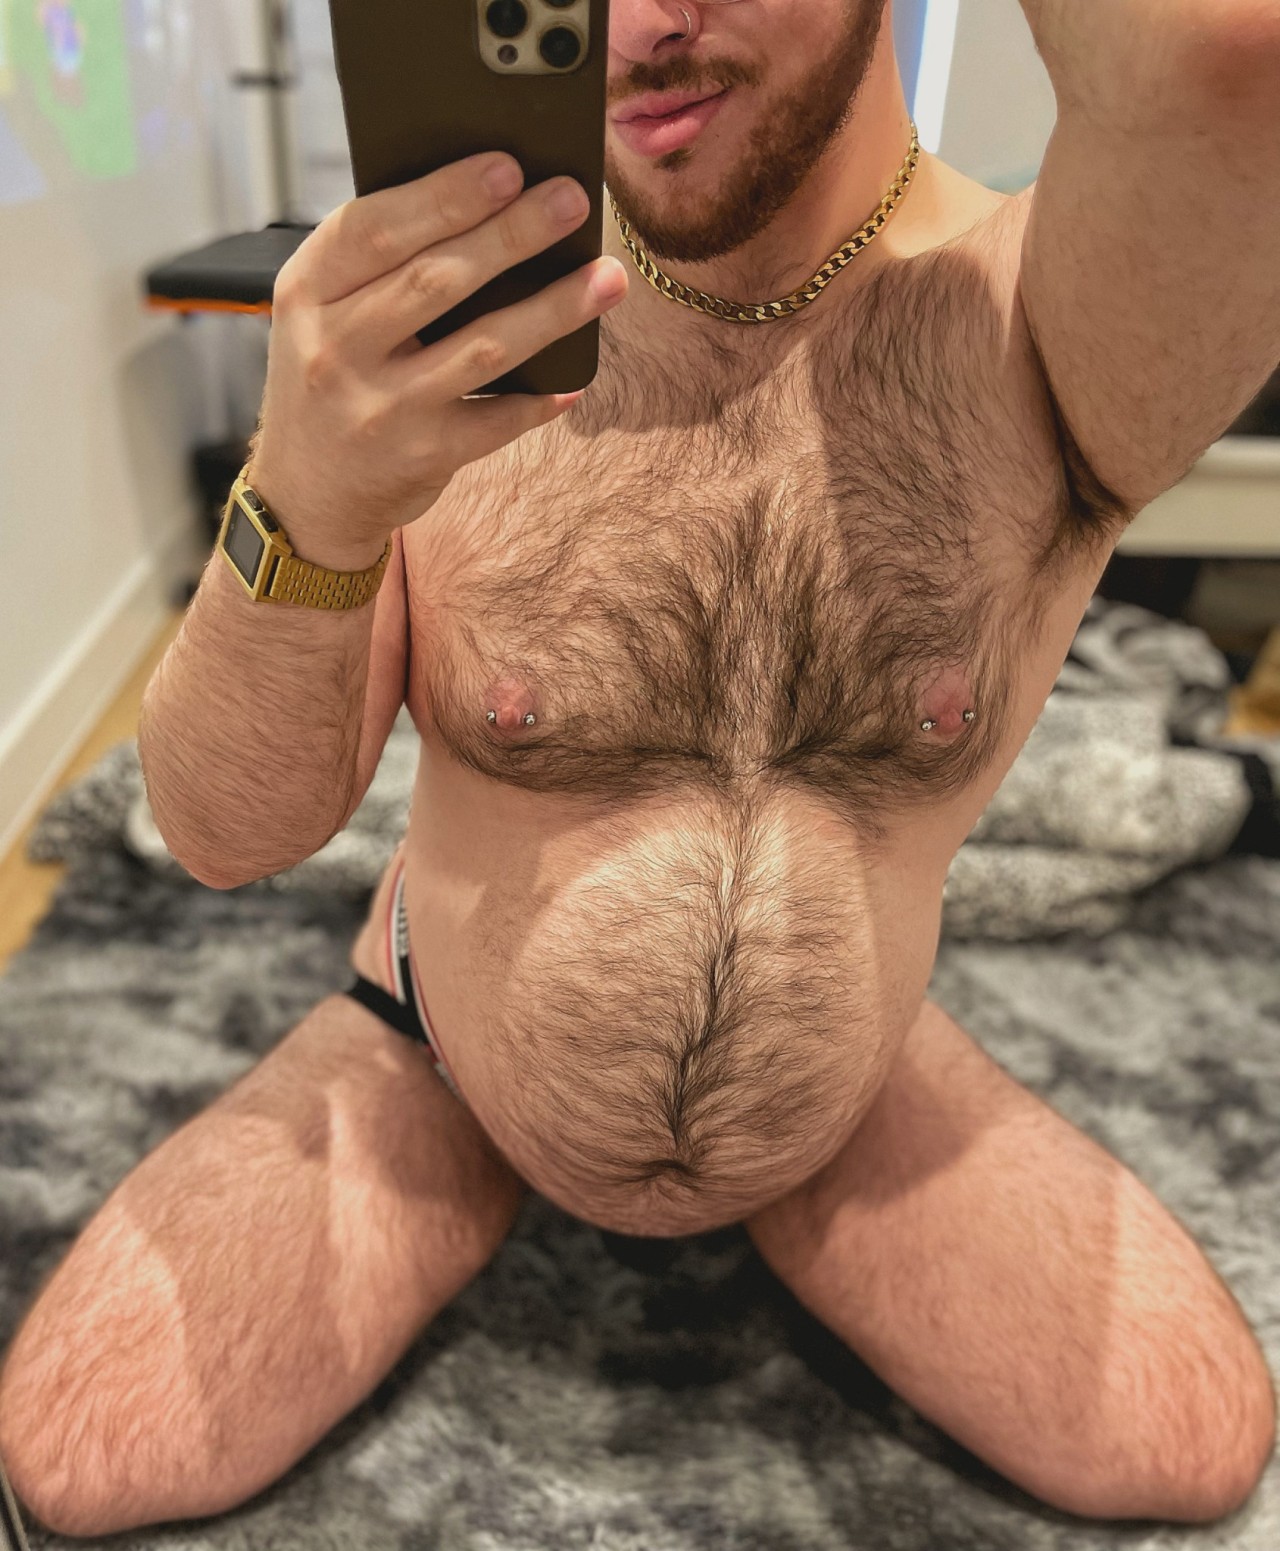 Porn photo wank-bank-4-u-deactivated202111:Round hairy